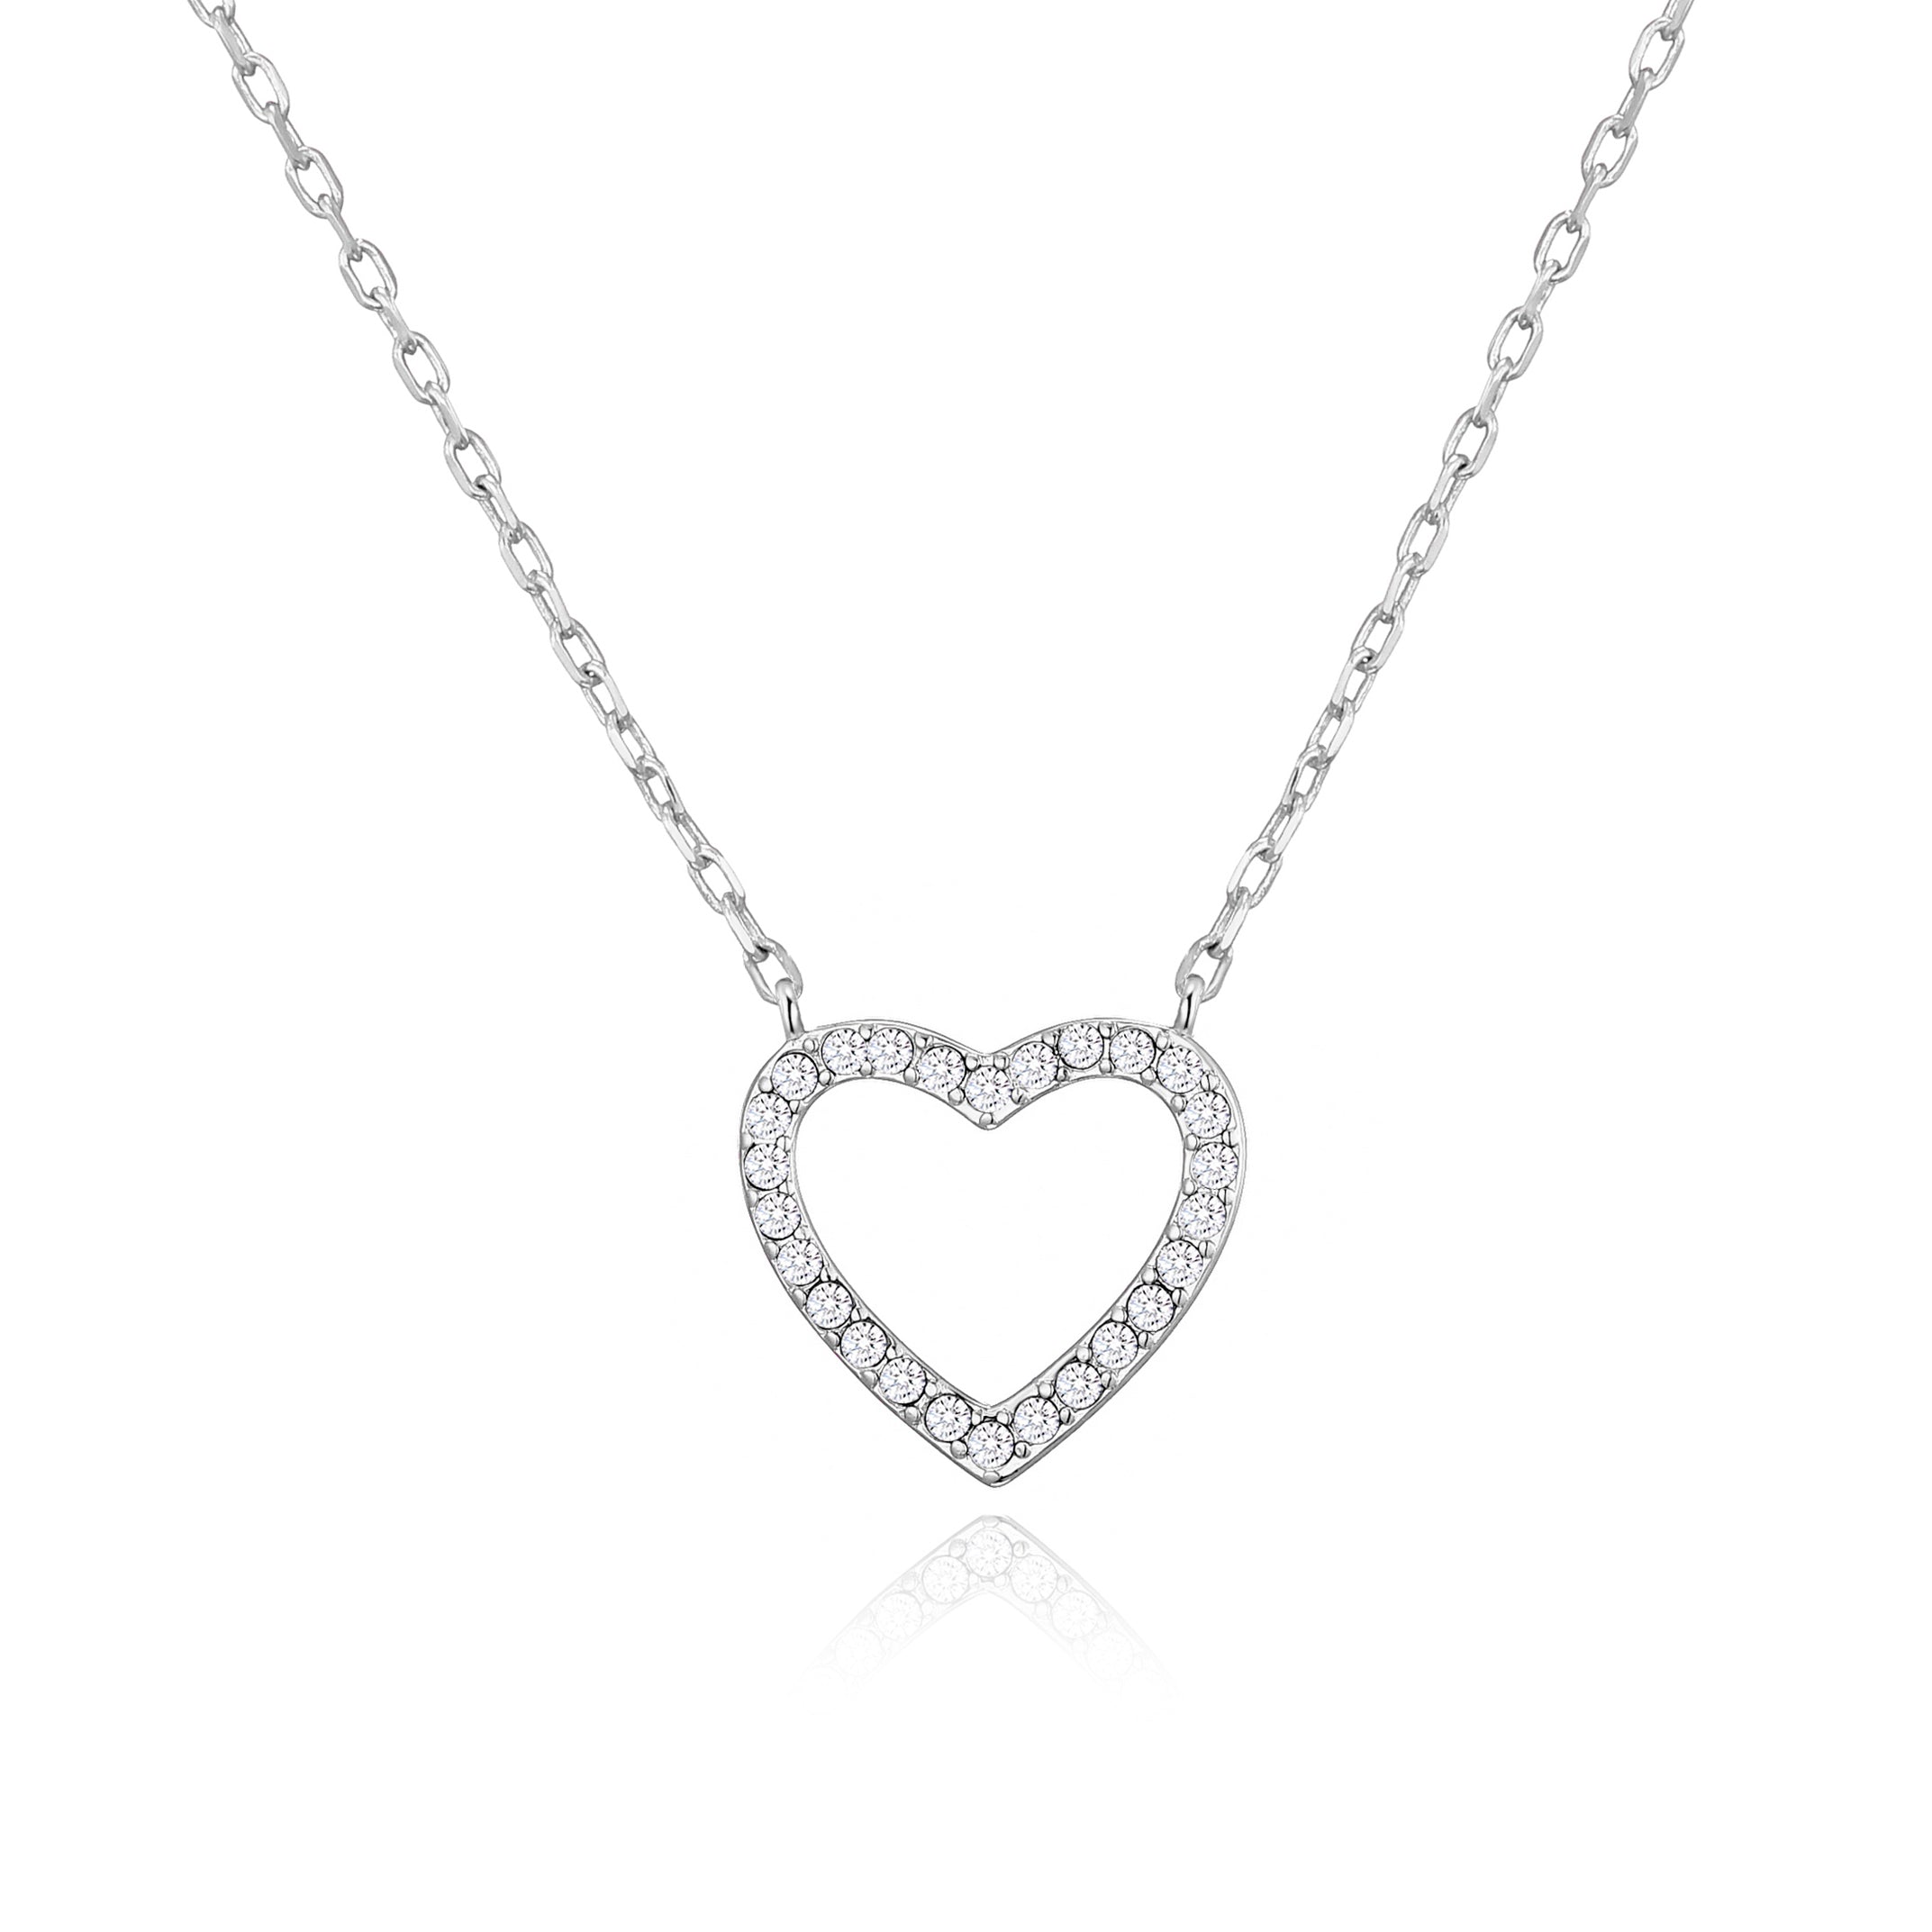 Silver Plated Open Heart Necklace Created with Zircondia® Crystals by Philip Jones Jewellery